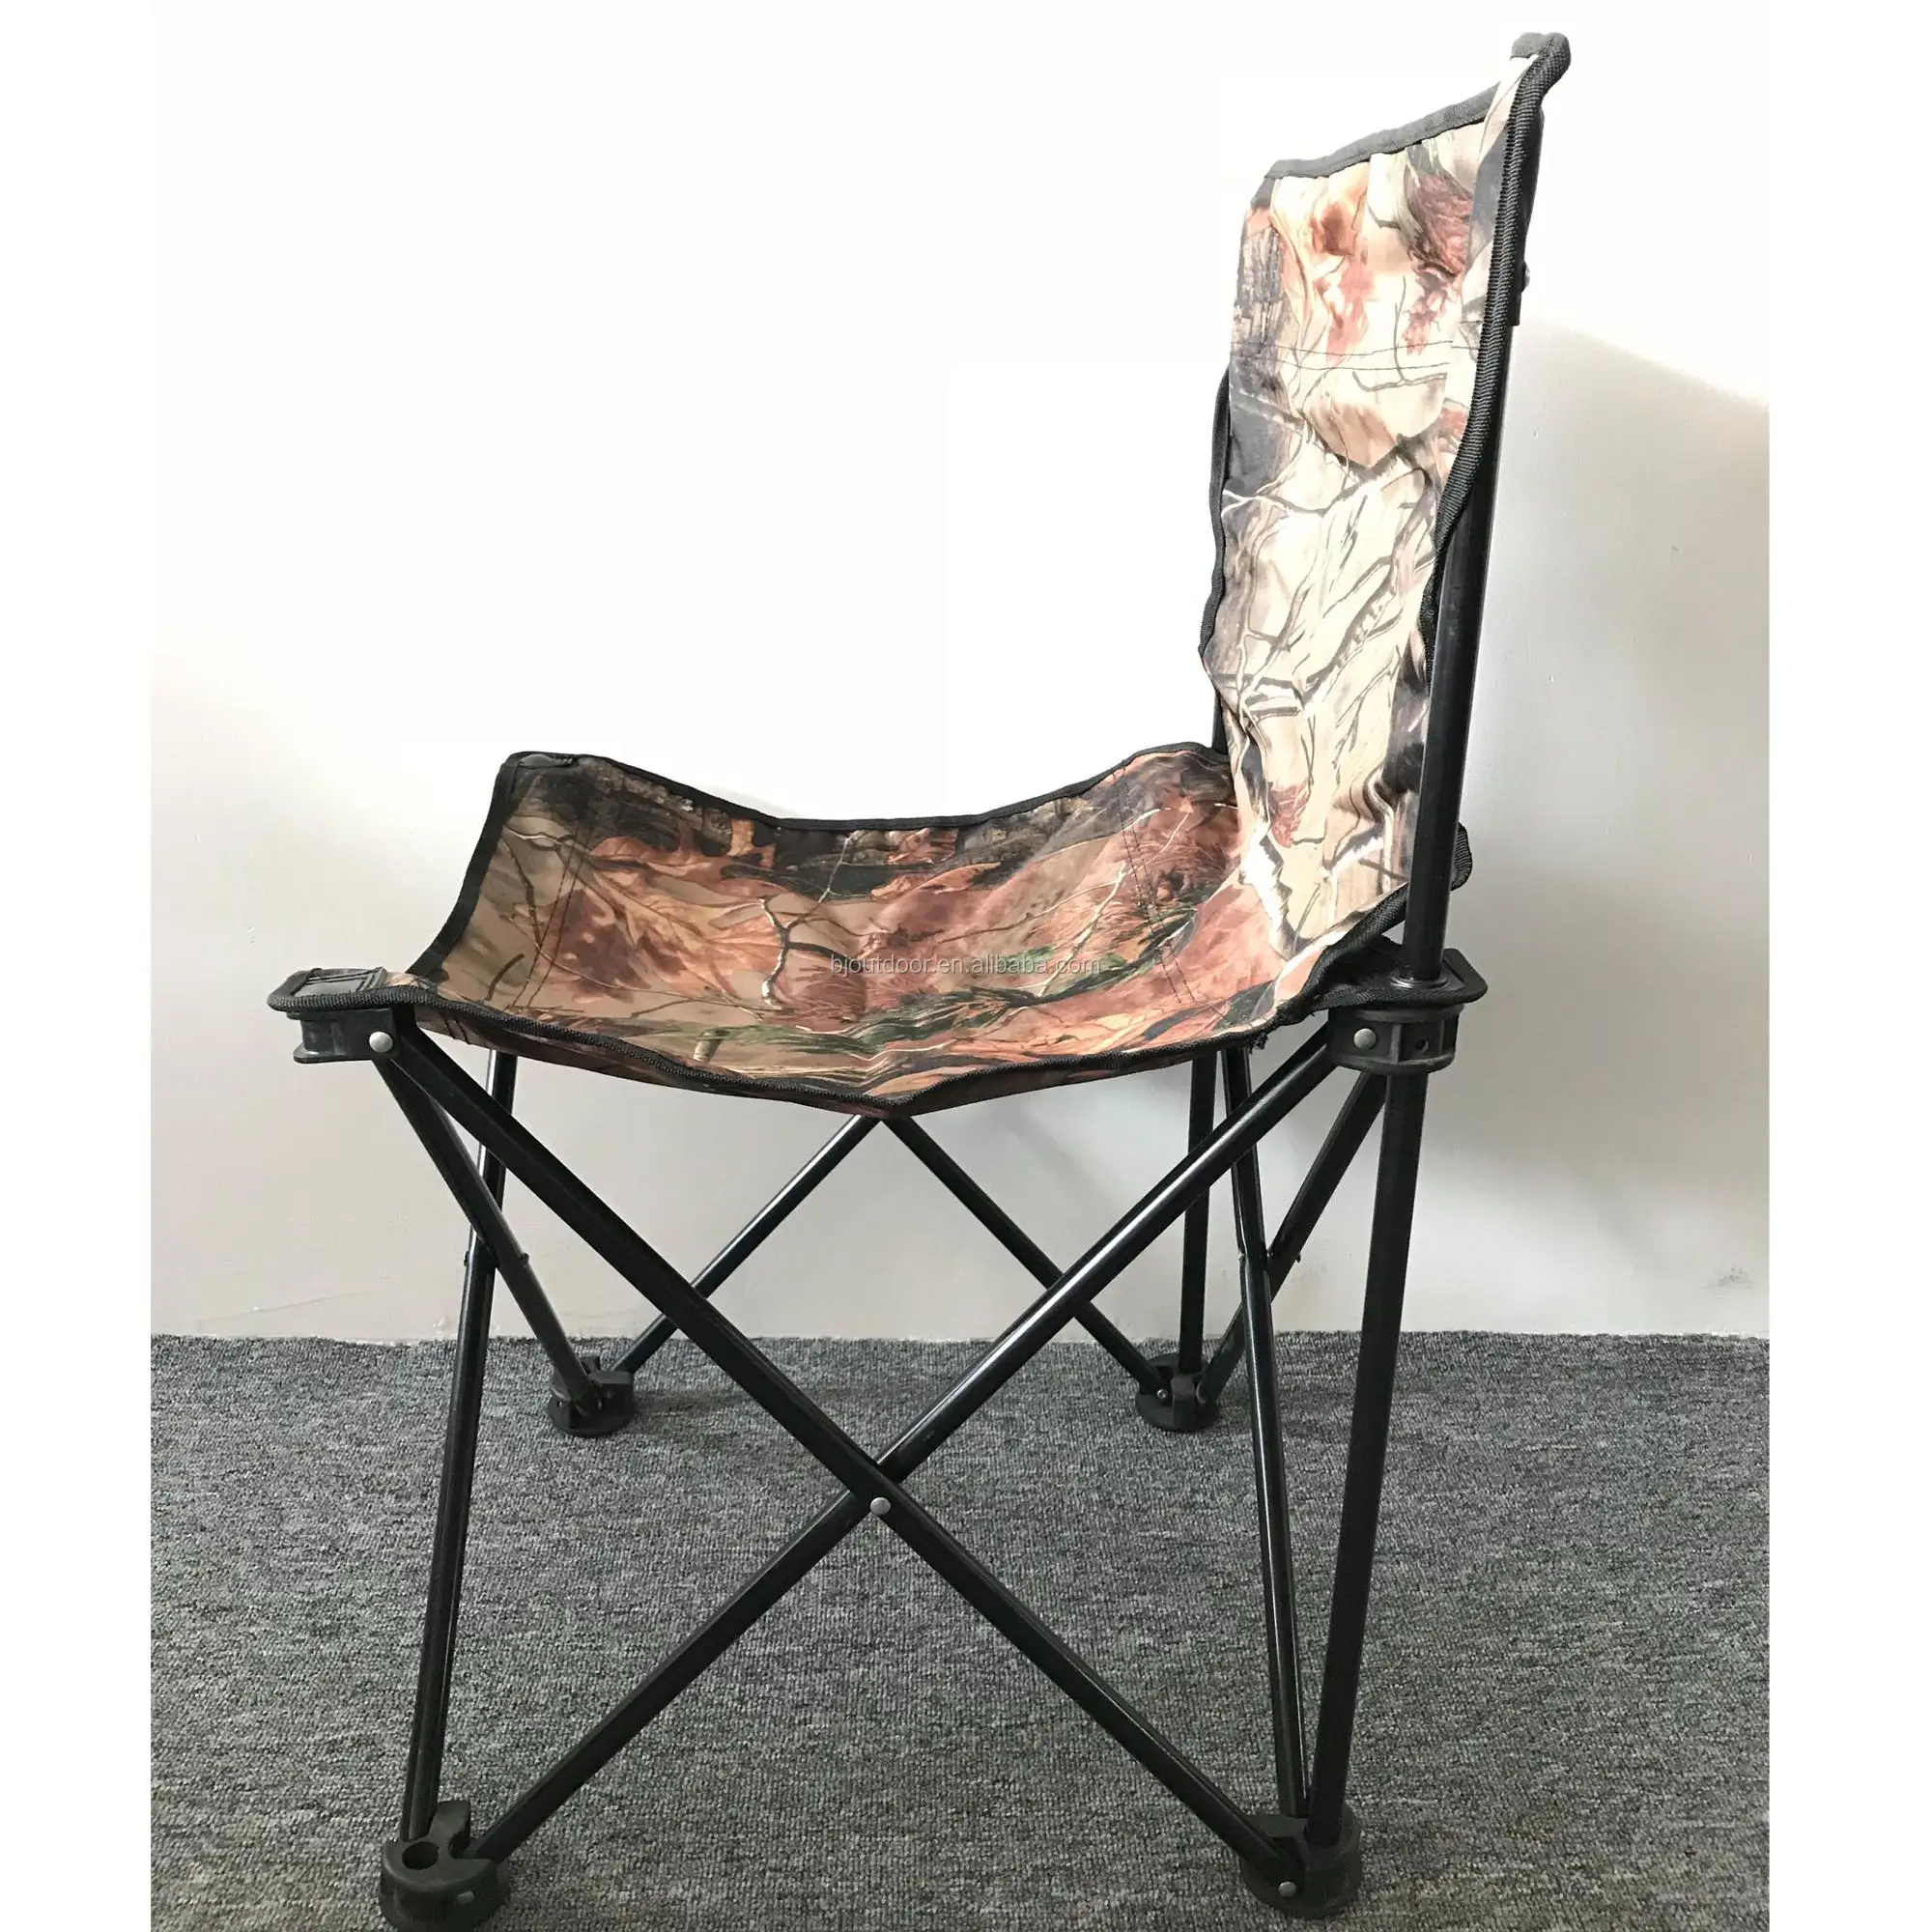 Fishing Camo Chair Folding Chair Without Armrest Camo Folding Camping Chair From Bj Outdoor Buy Fishing Camo Chair